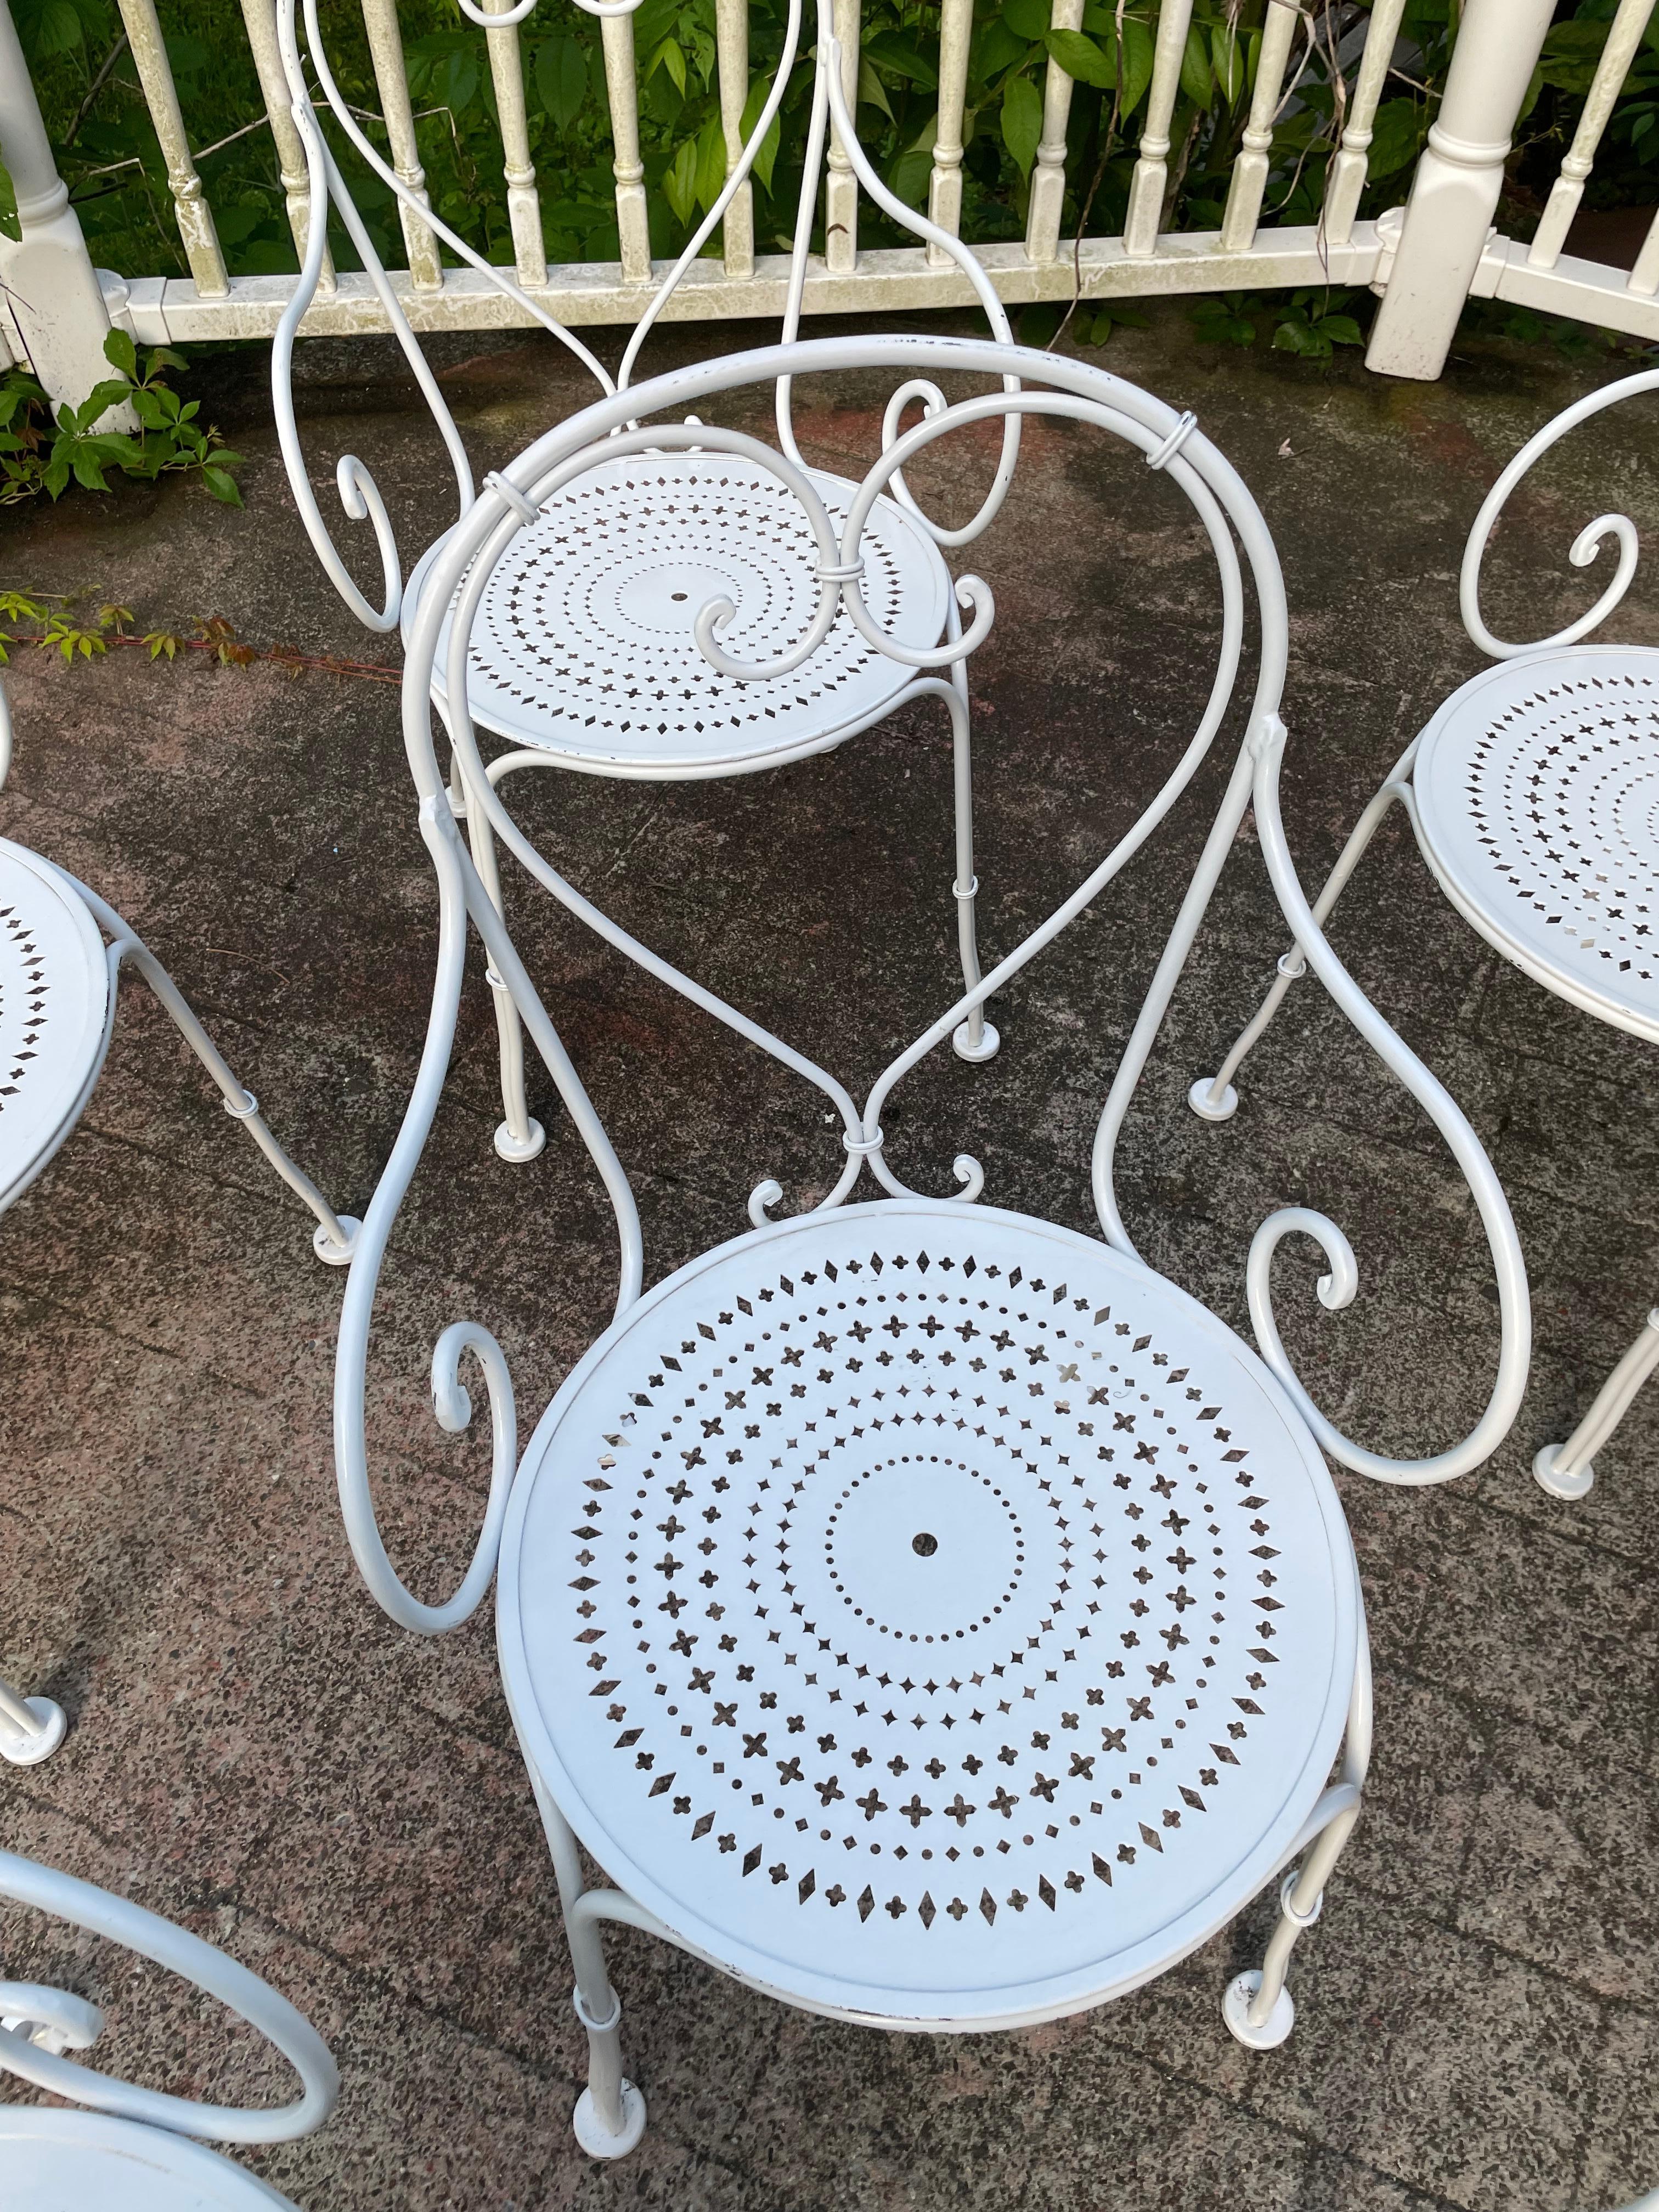 Set of 8 Wrought Iron French Cafe Chairs In Good Condition For Sale In Cumberland, RI